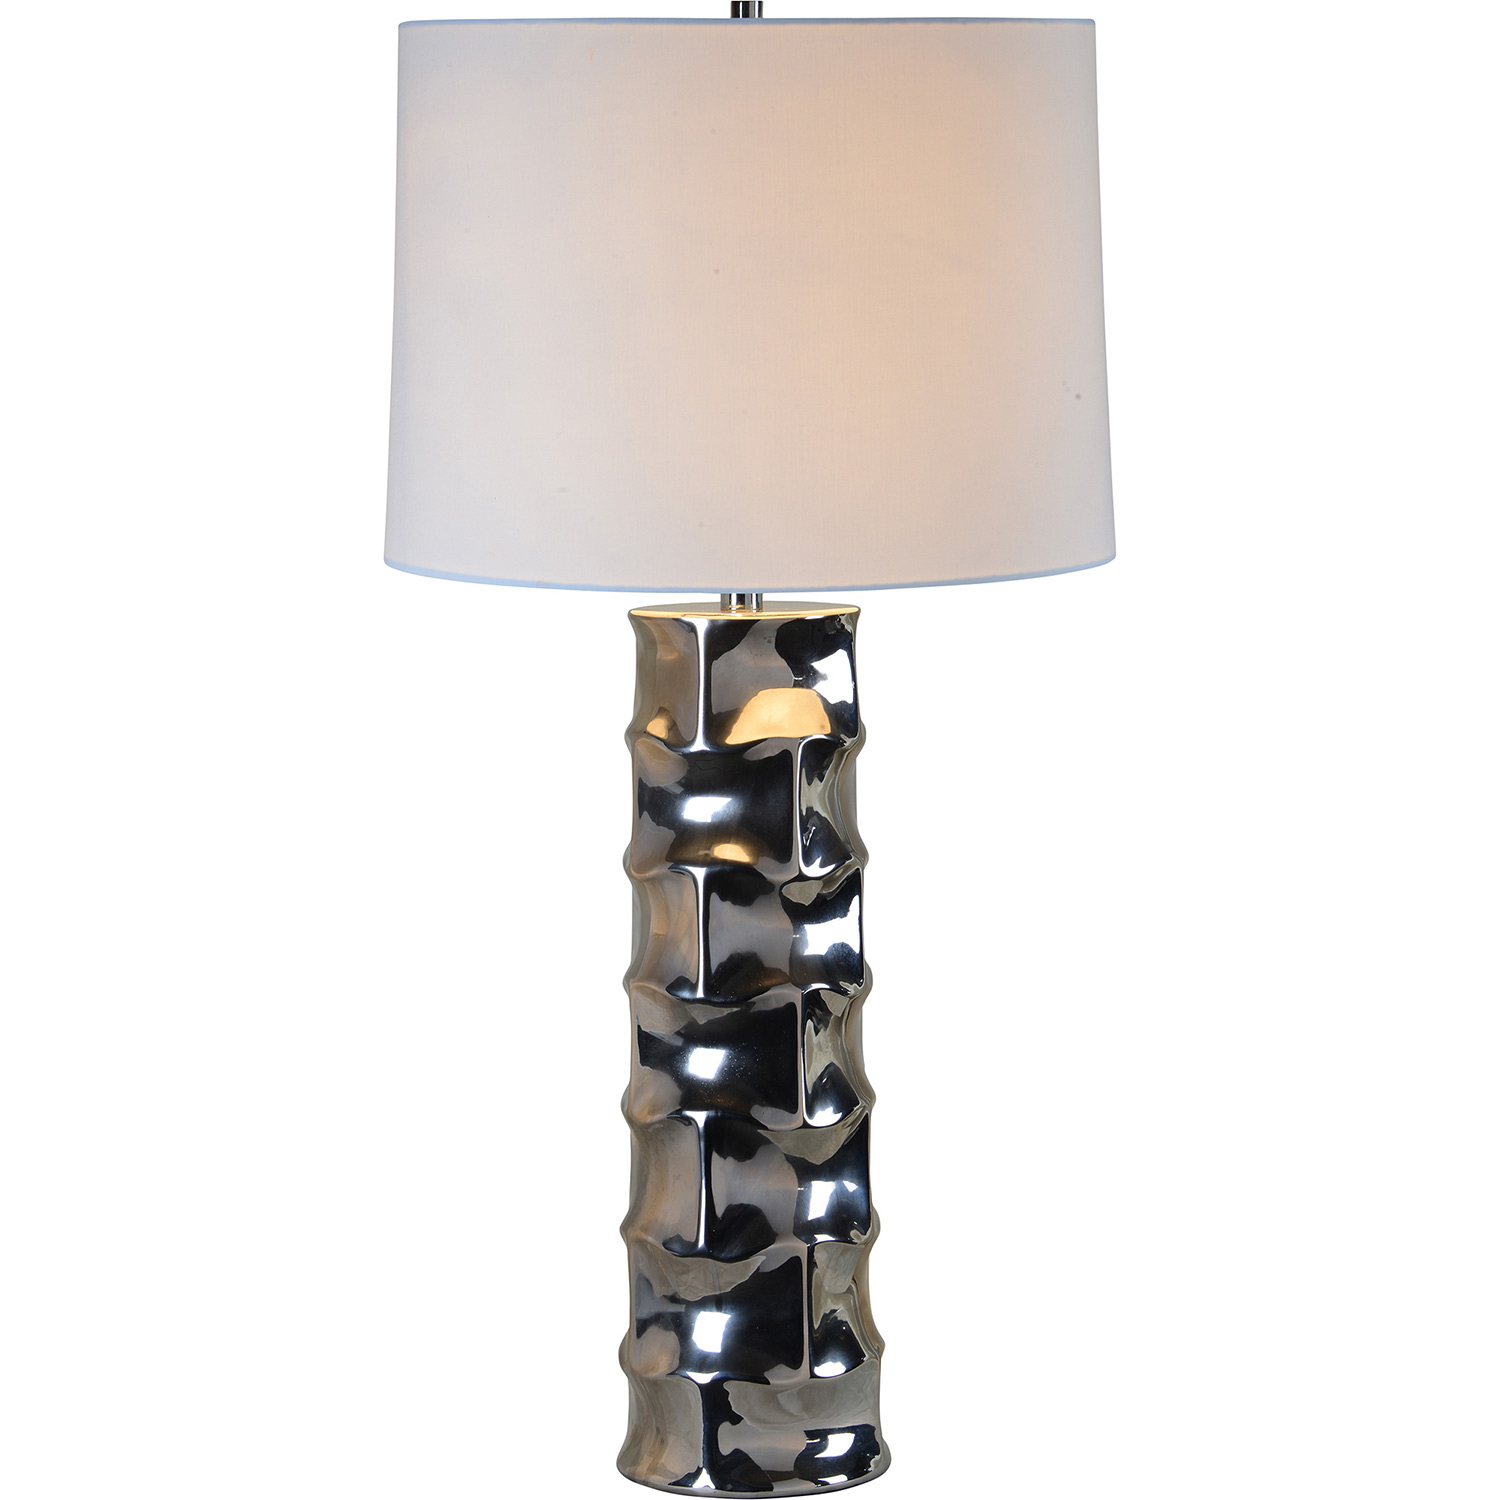 Ren-Wil Quenby Table Lamp - Silver Plated